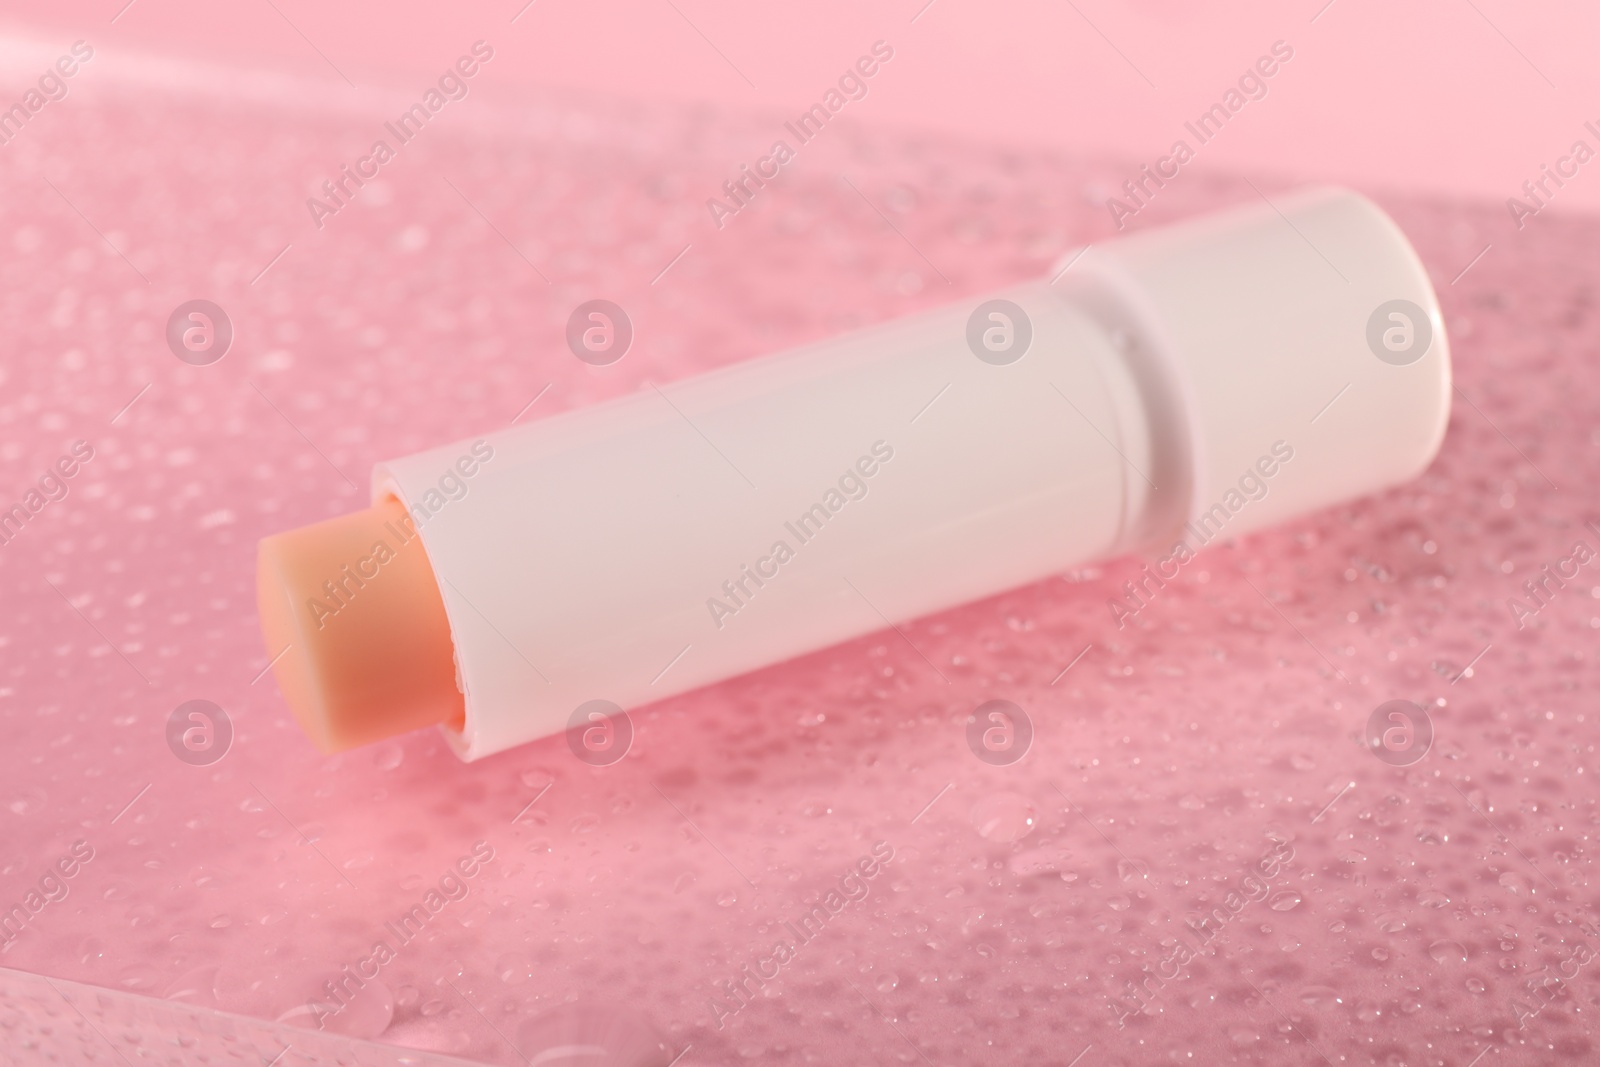 Photo of Lip balm and water drops on pink glass surface, closeup